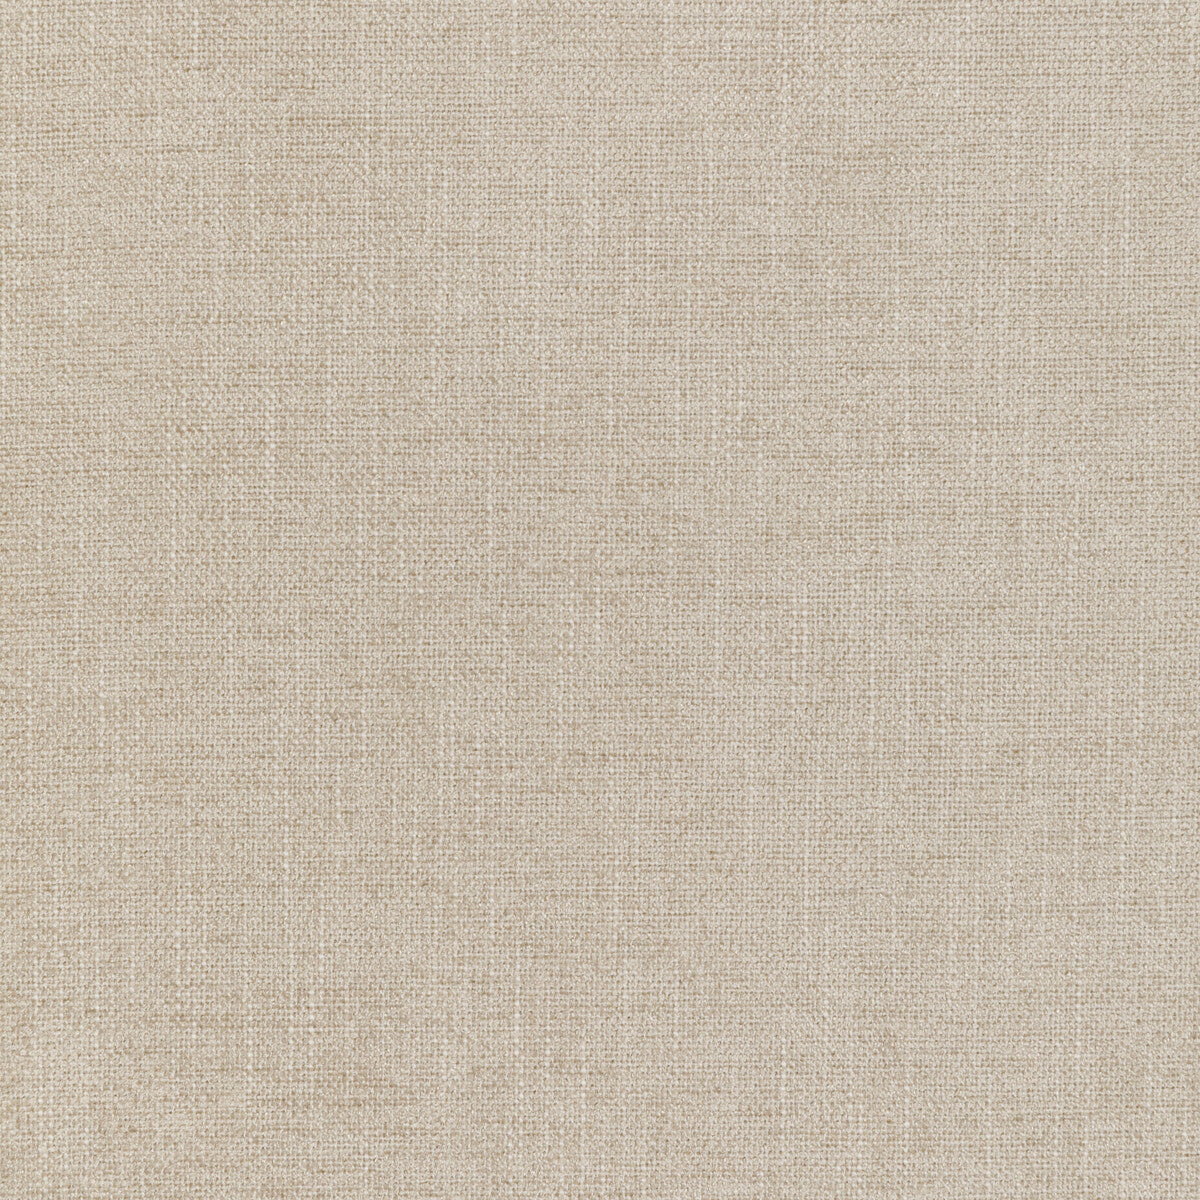 Kravet Smart fabric in 35973-1 color - pattern 35973.1.0 - by Kravet Smart in the Performance Crypton Home collection